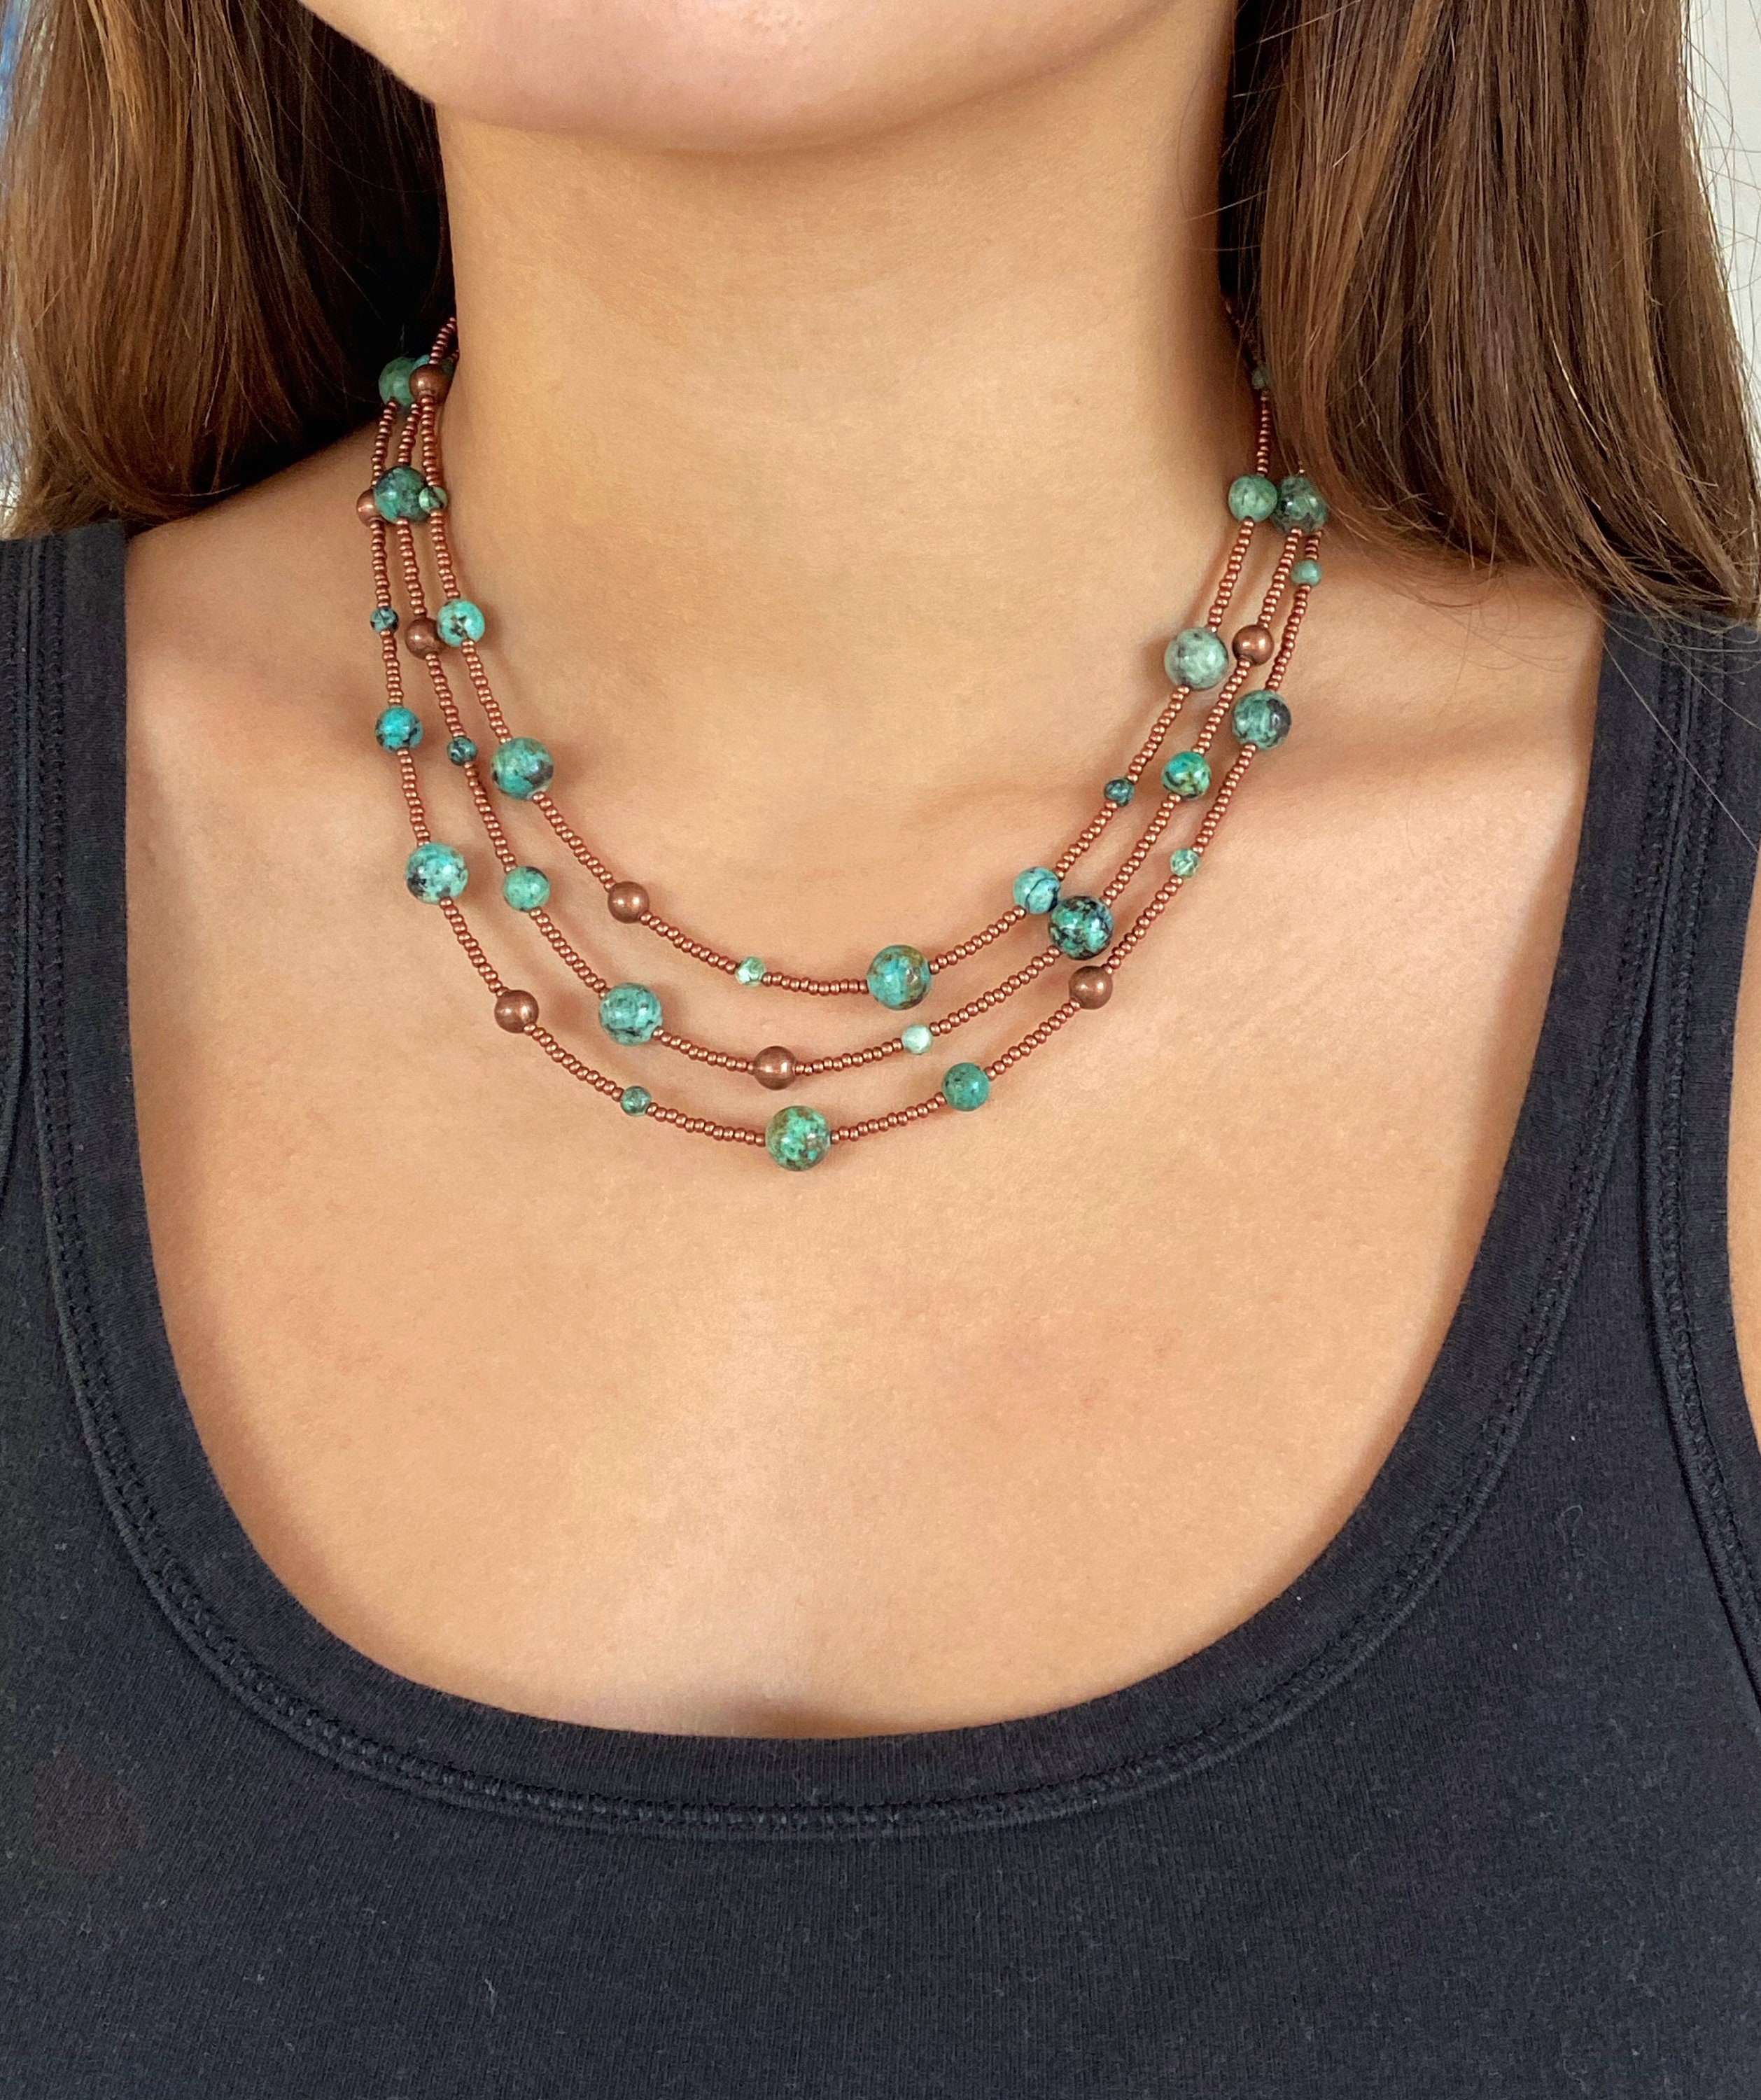 Details about   Multi-strands old looking rustic Africa turquoise nuggets necklace/ z188-w3 